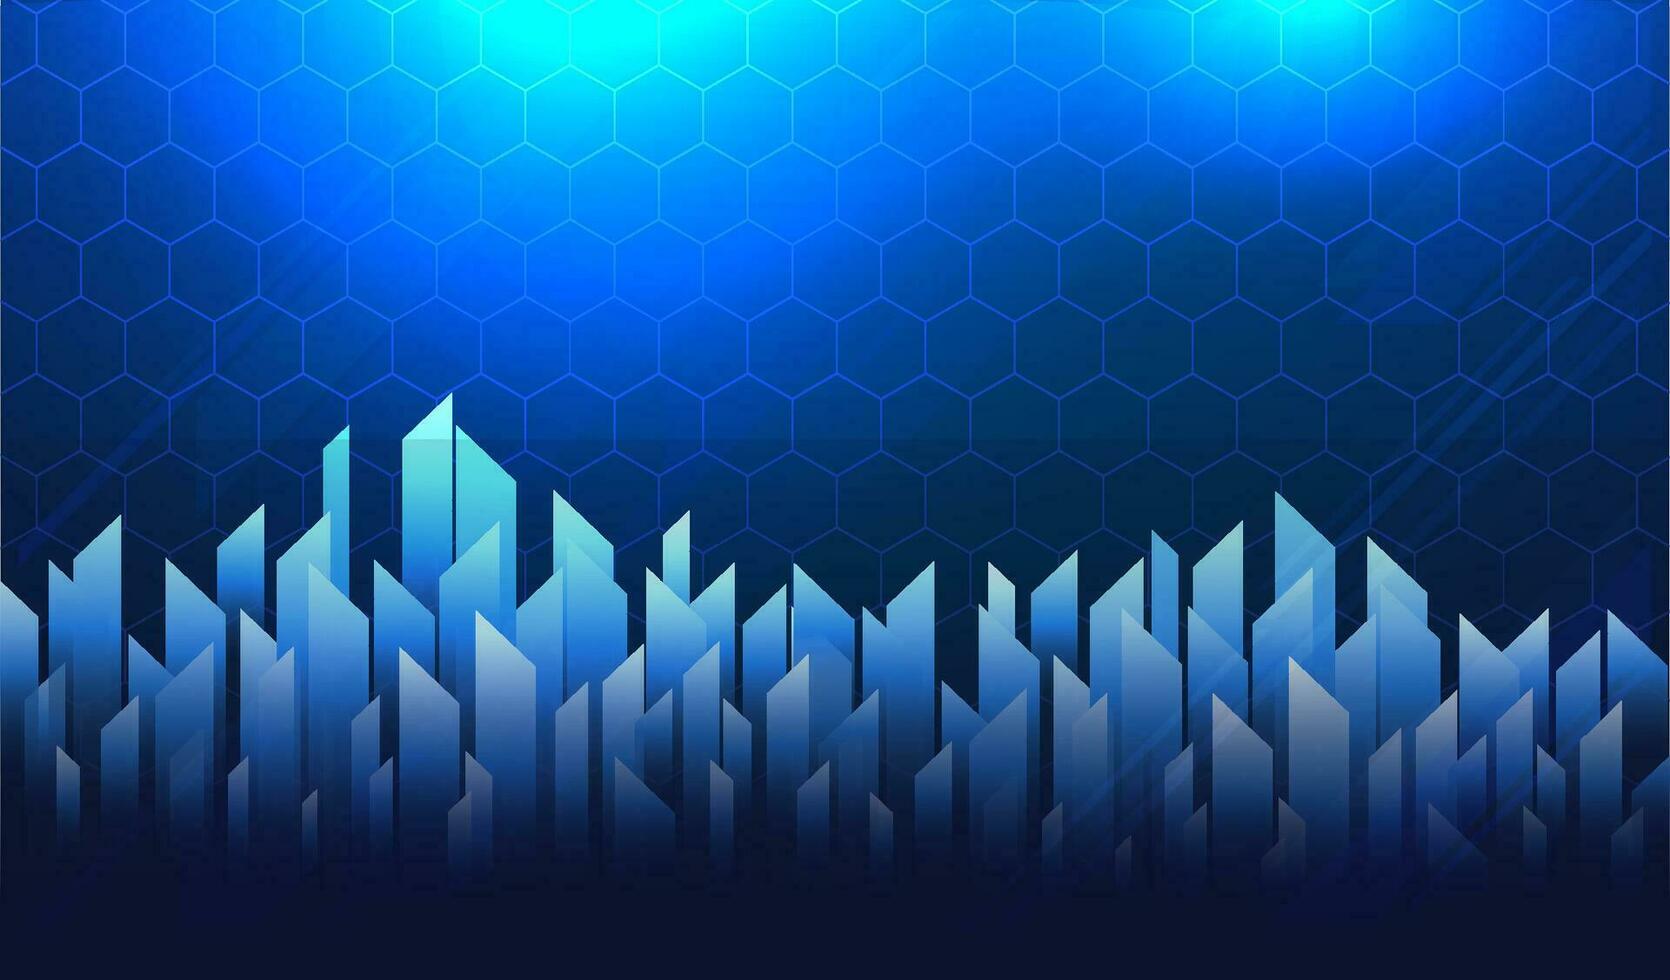 Digital Technology Cyber Blue Grid Abstract Background vector